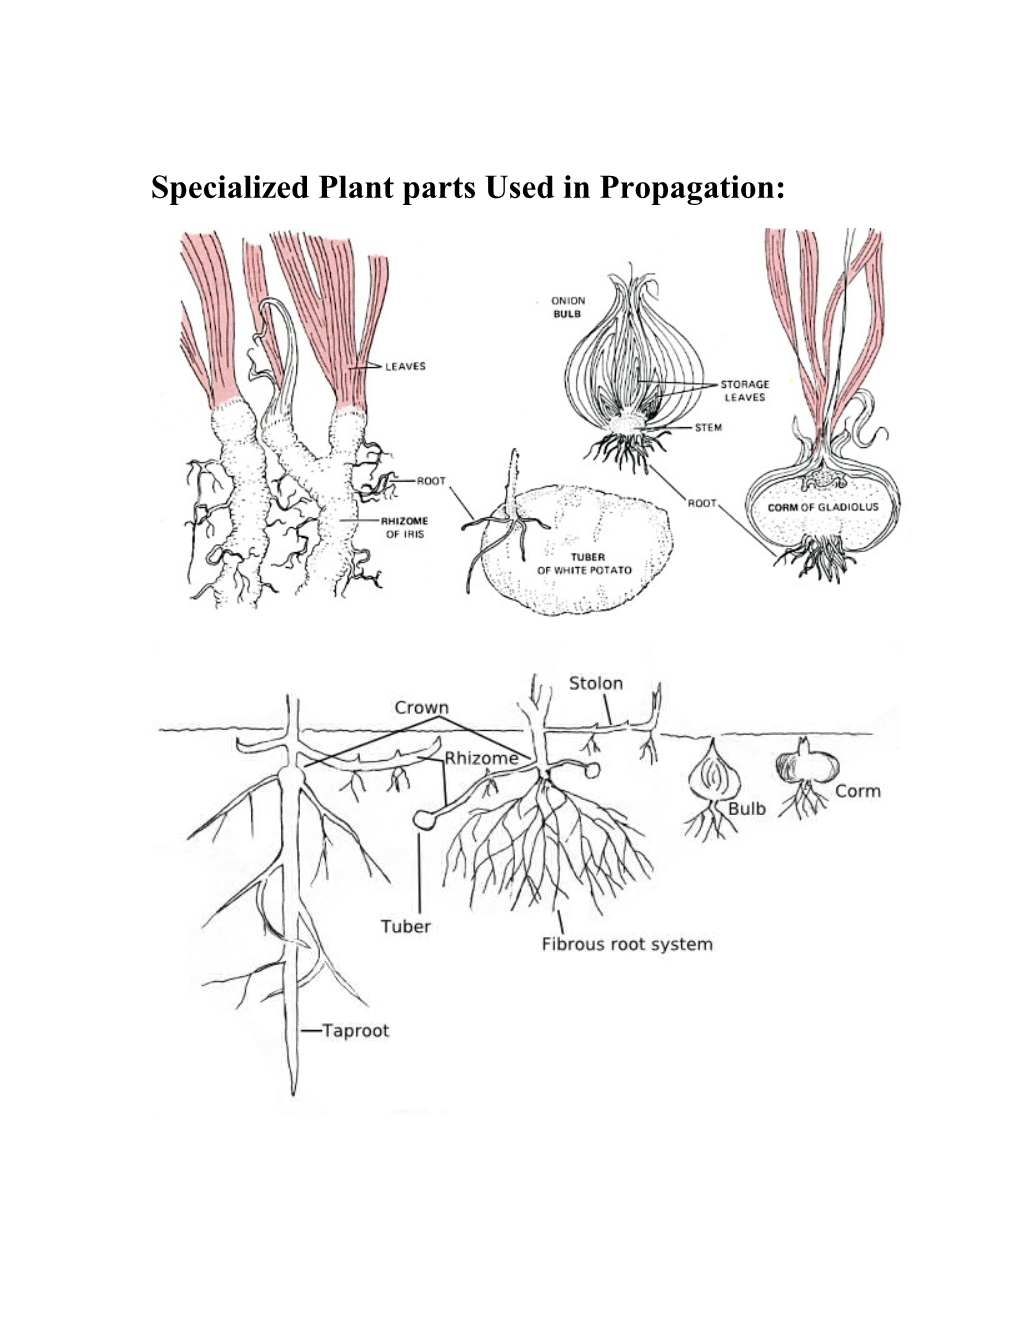 Specialized Plant Parts Used in Propagation